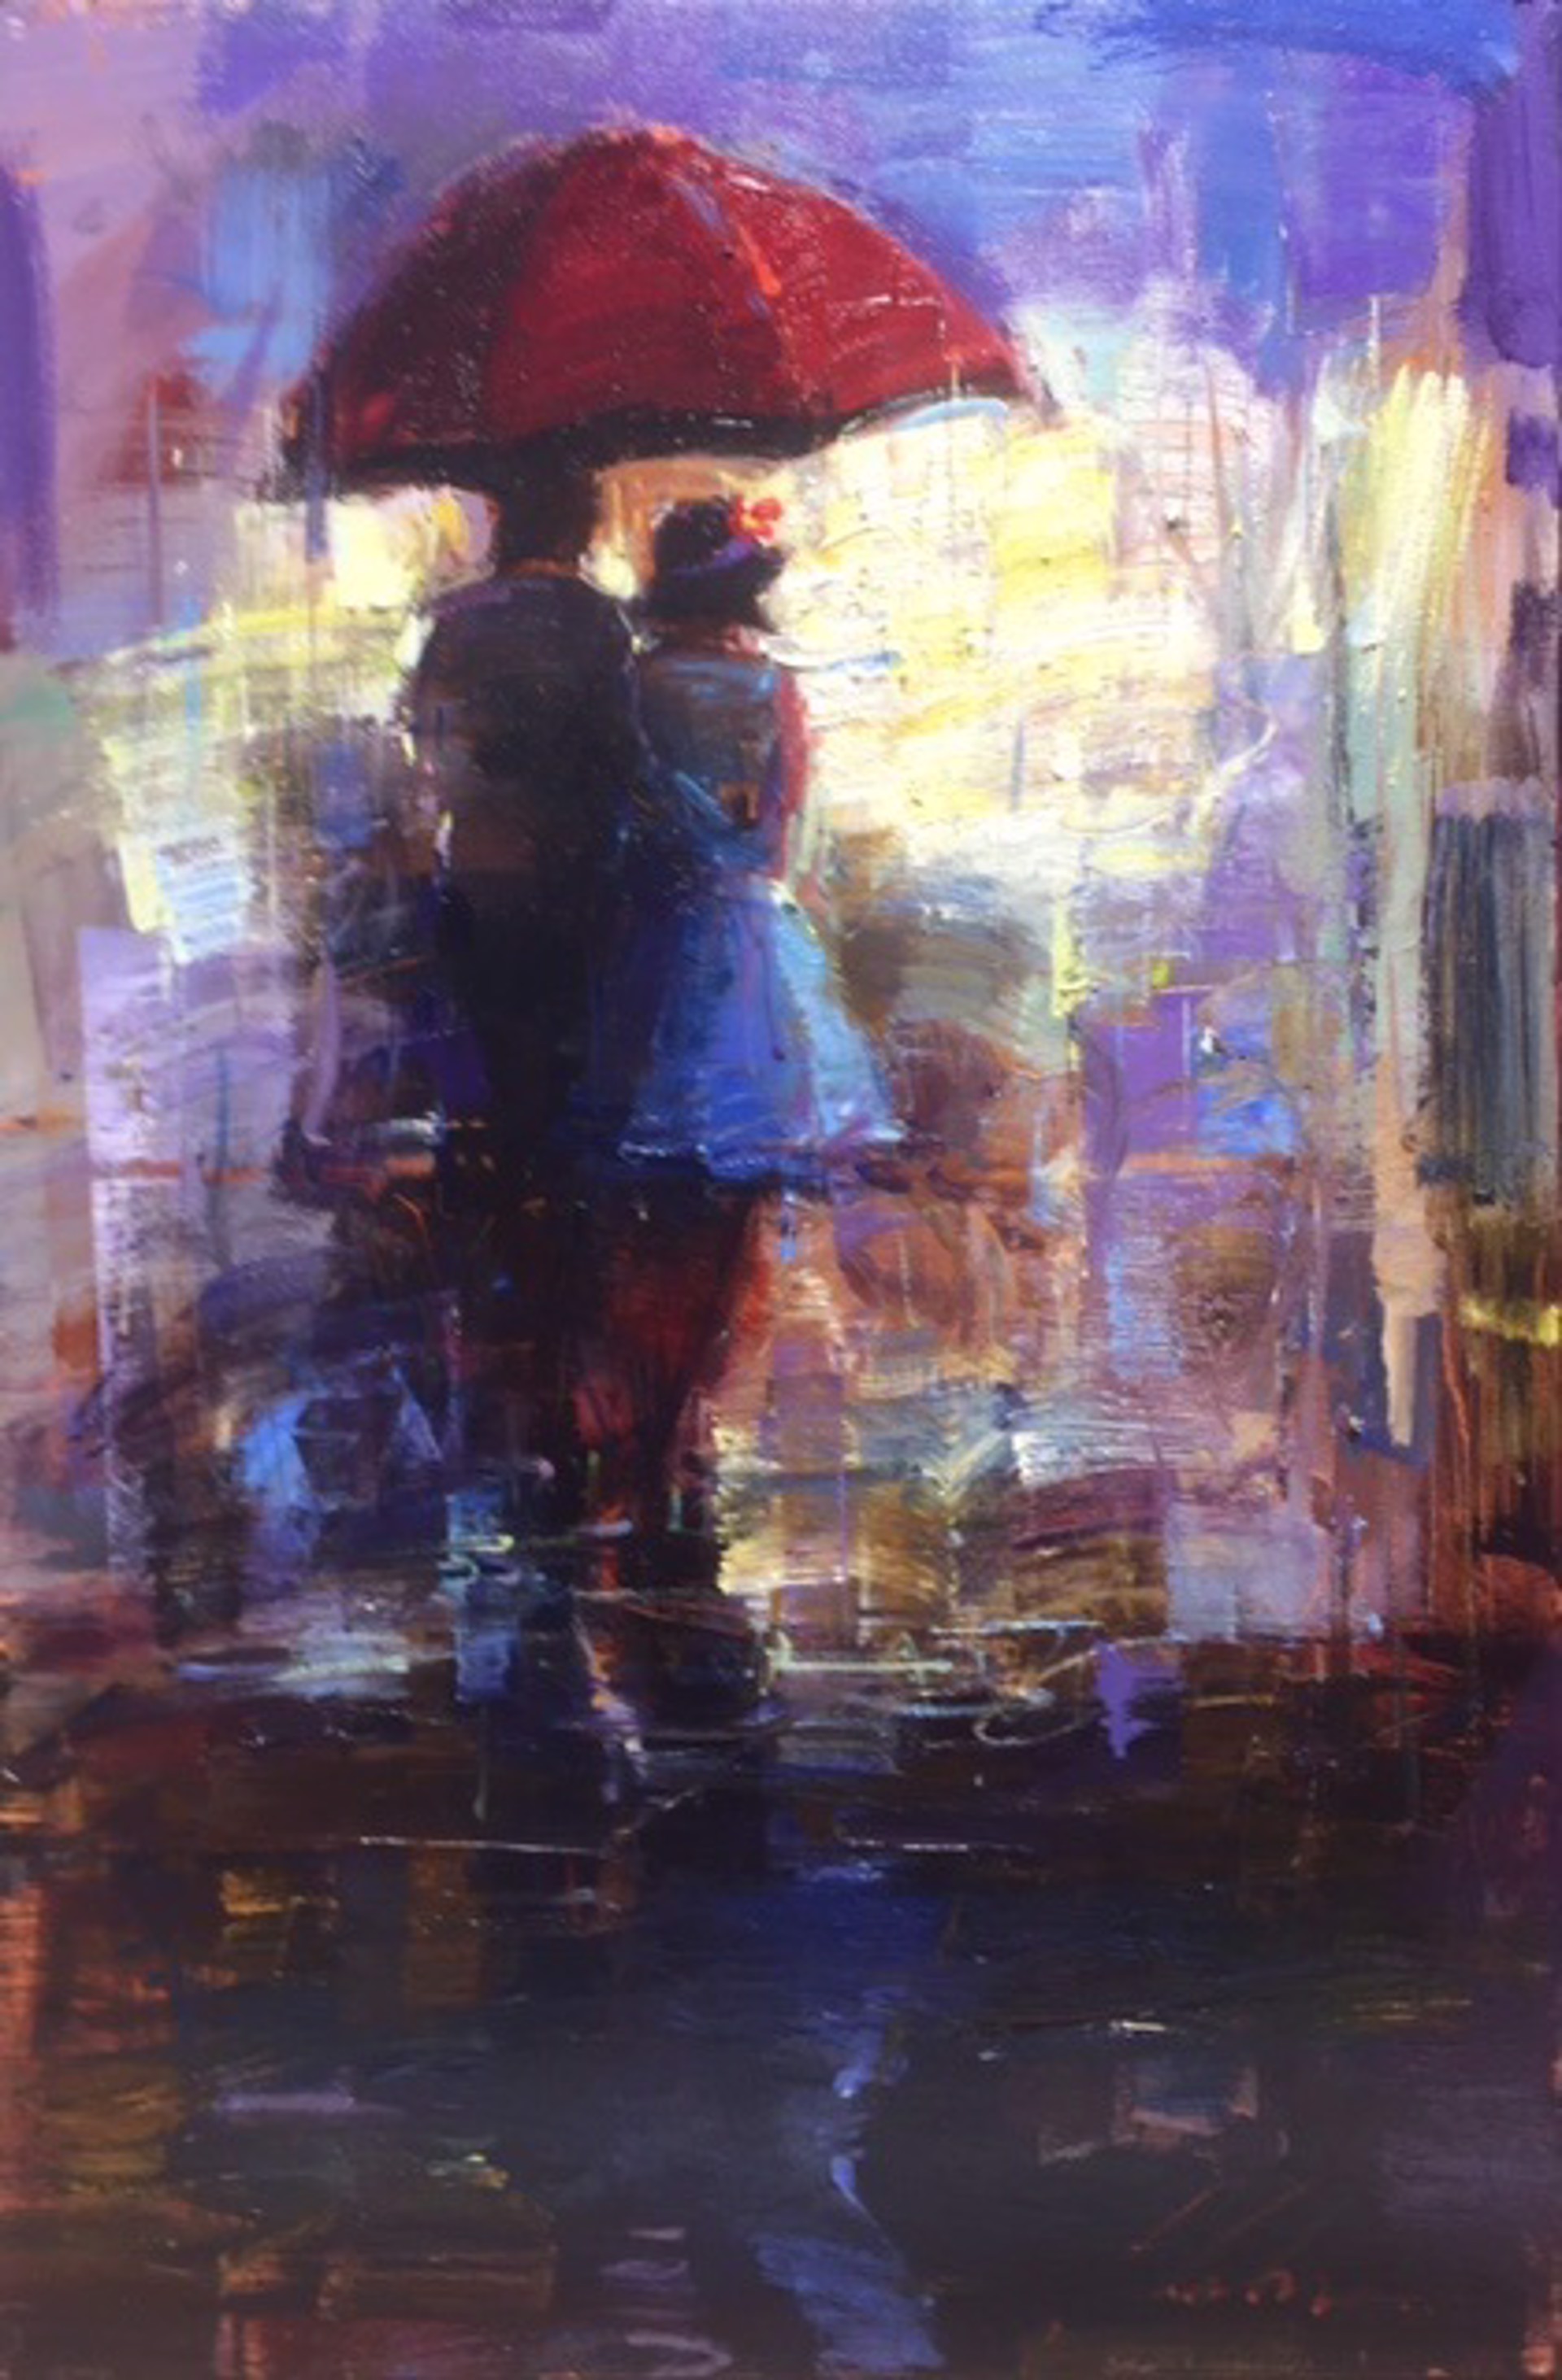 The Red Umbrella by Michael Flohr